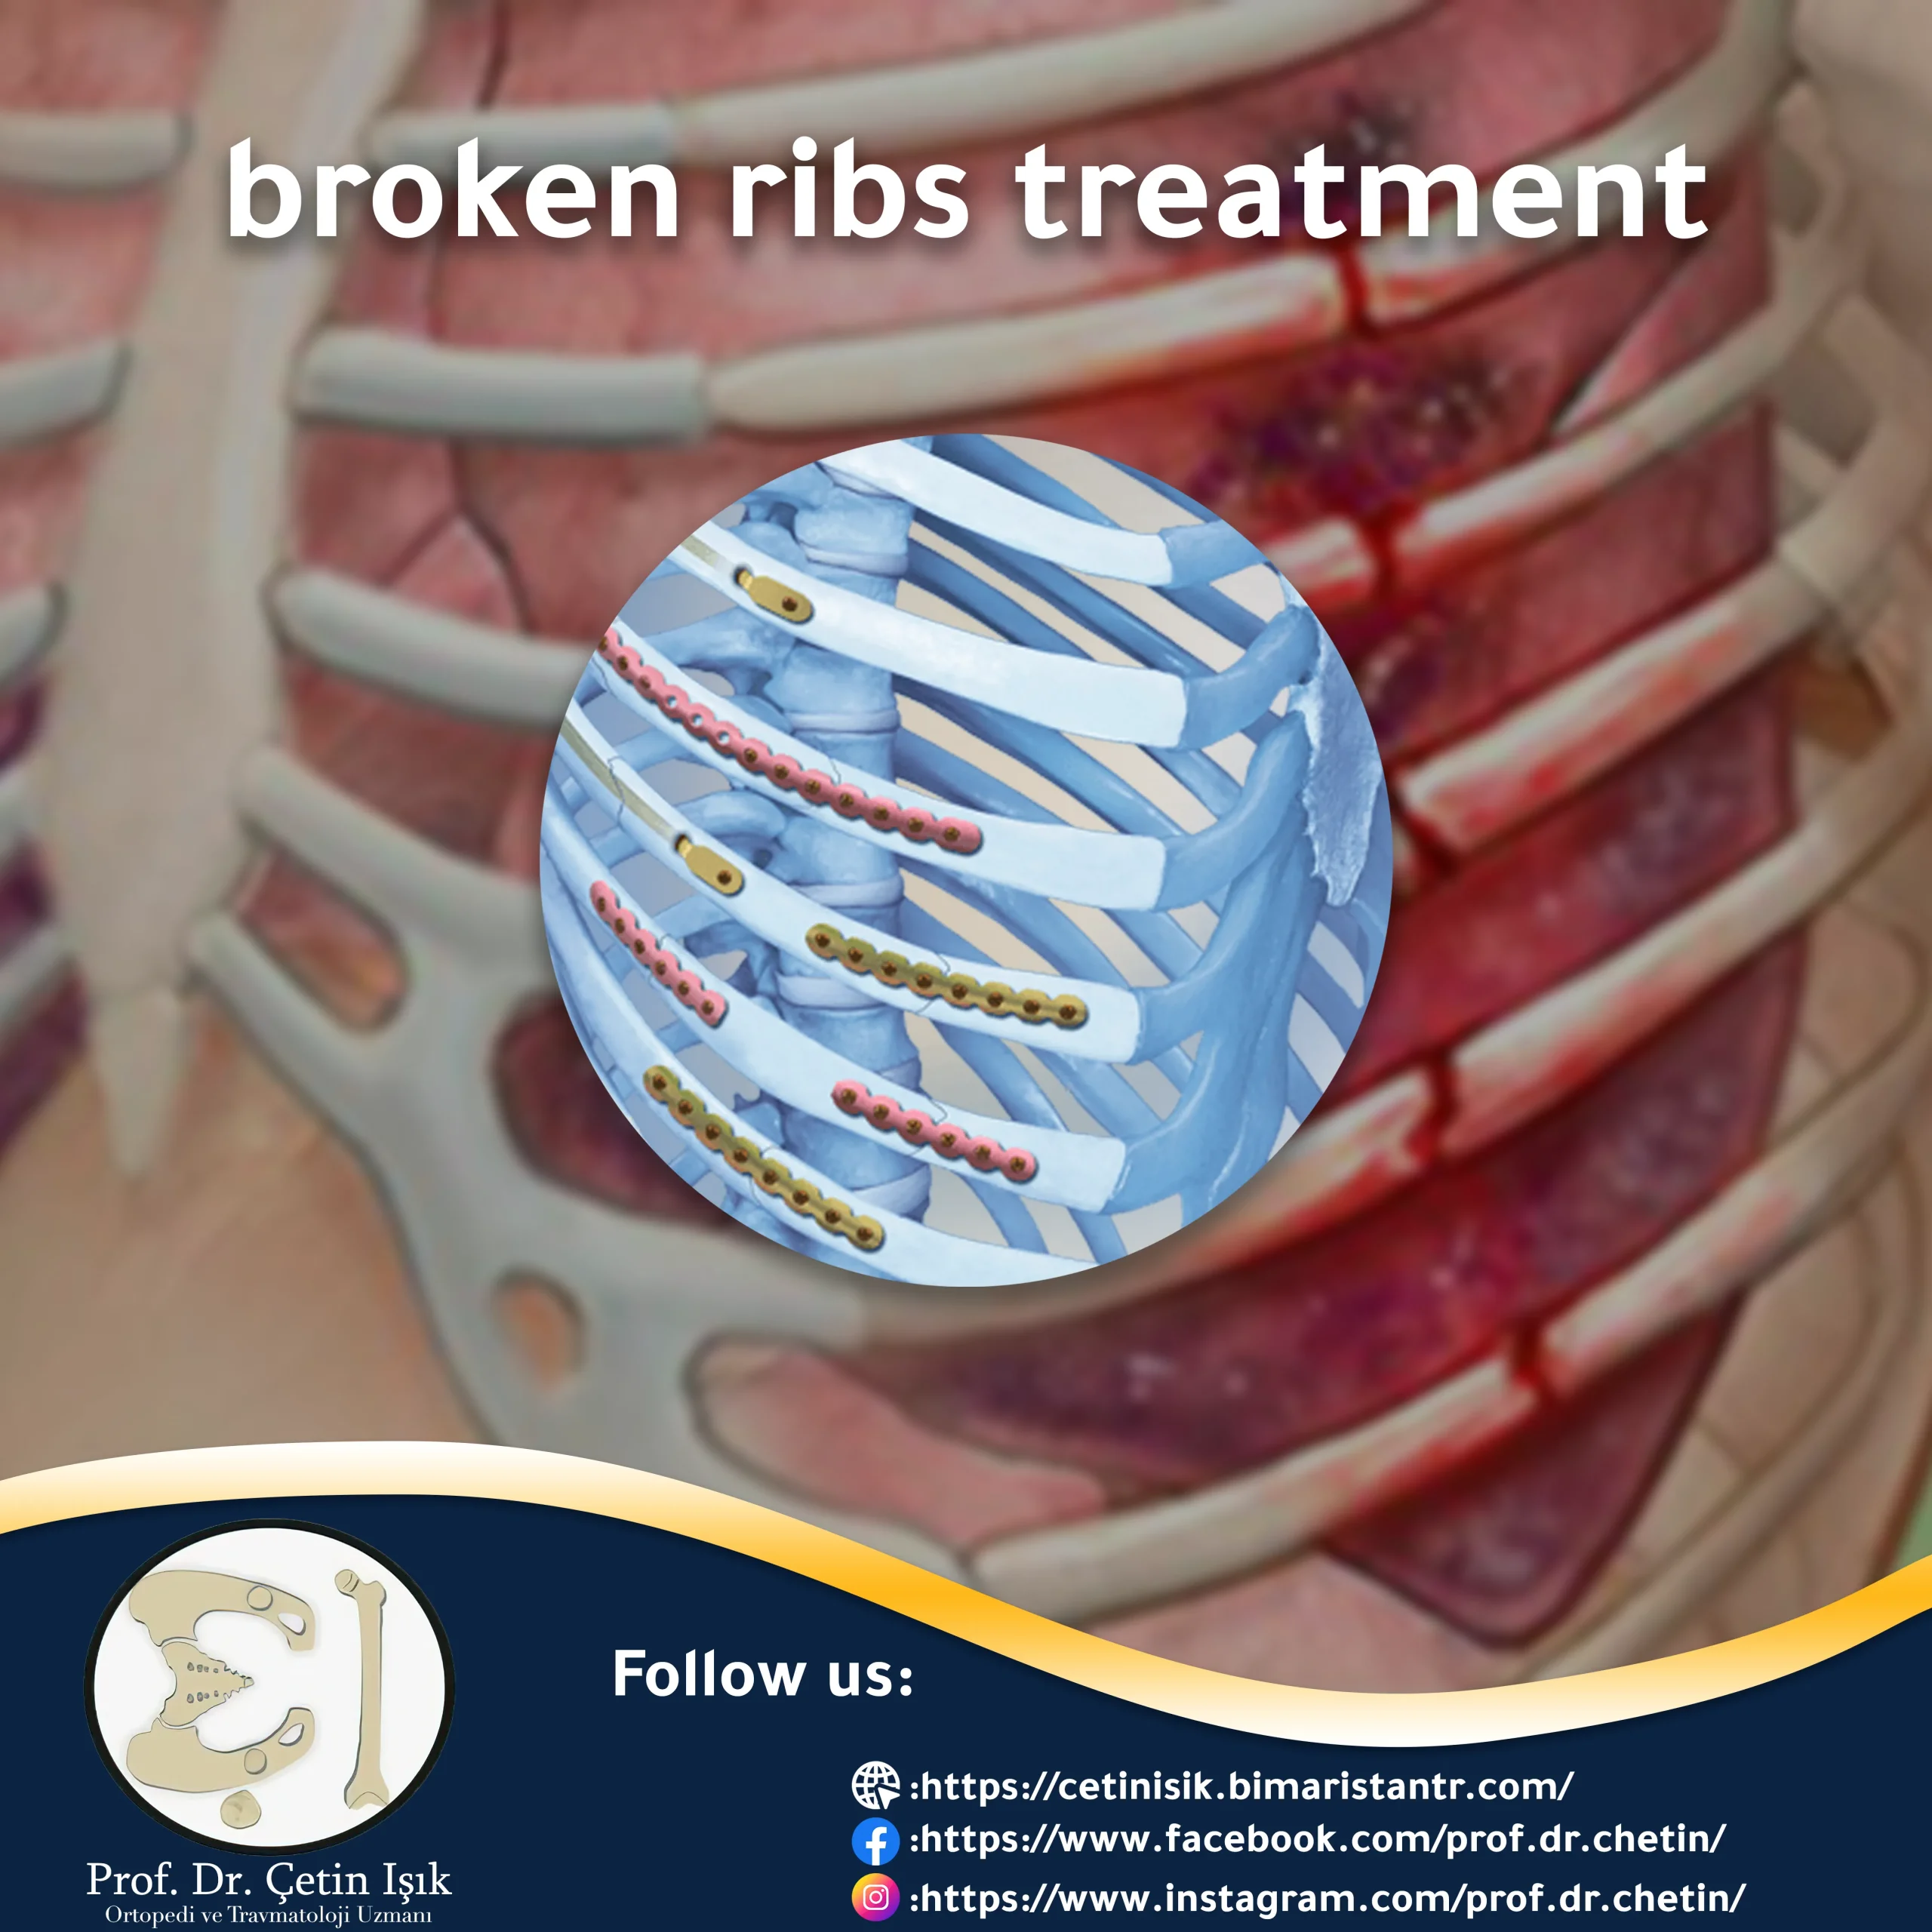 Rib fracture treatment - conservative or surgical